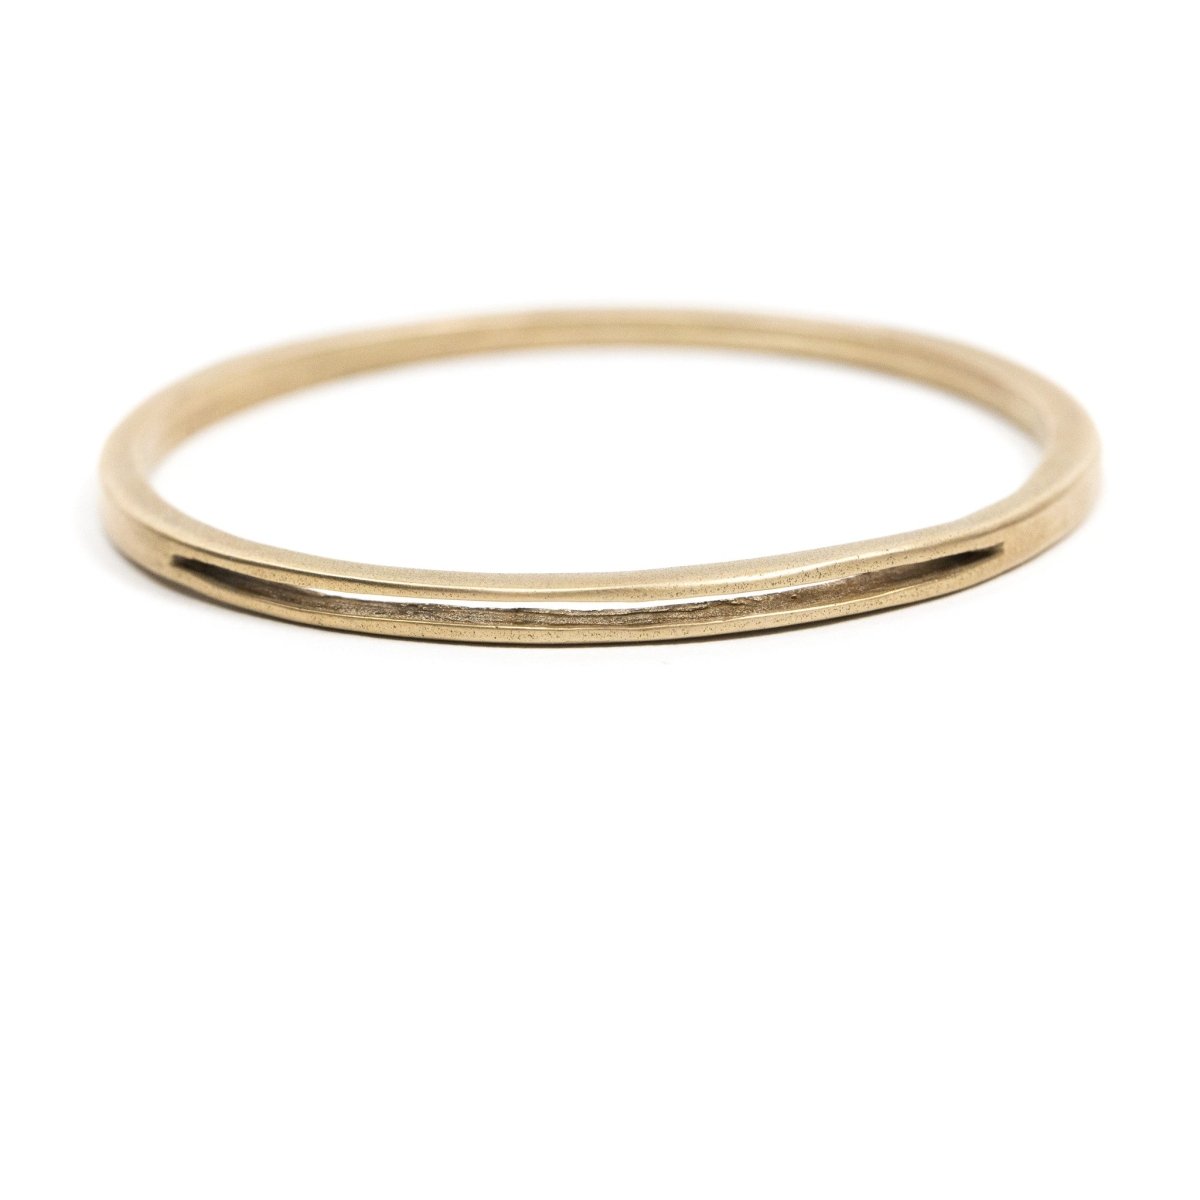 Sturdy, circular, cast-bronze bangle bracelet, featuring one long, slim, cutout slit in the metal. Hand-crafted in Portland, Oregon. 